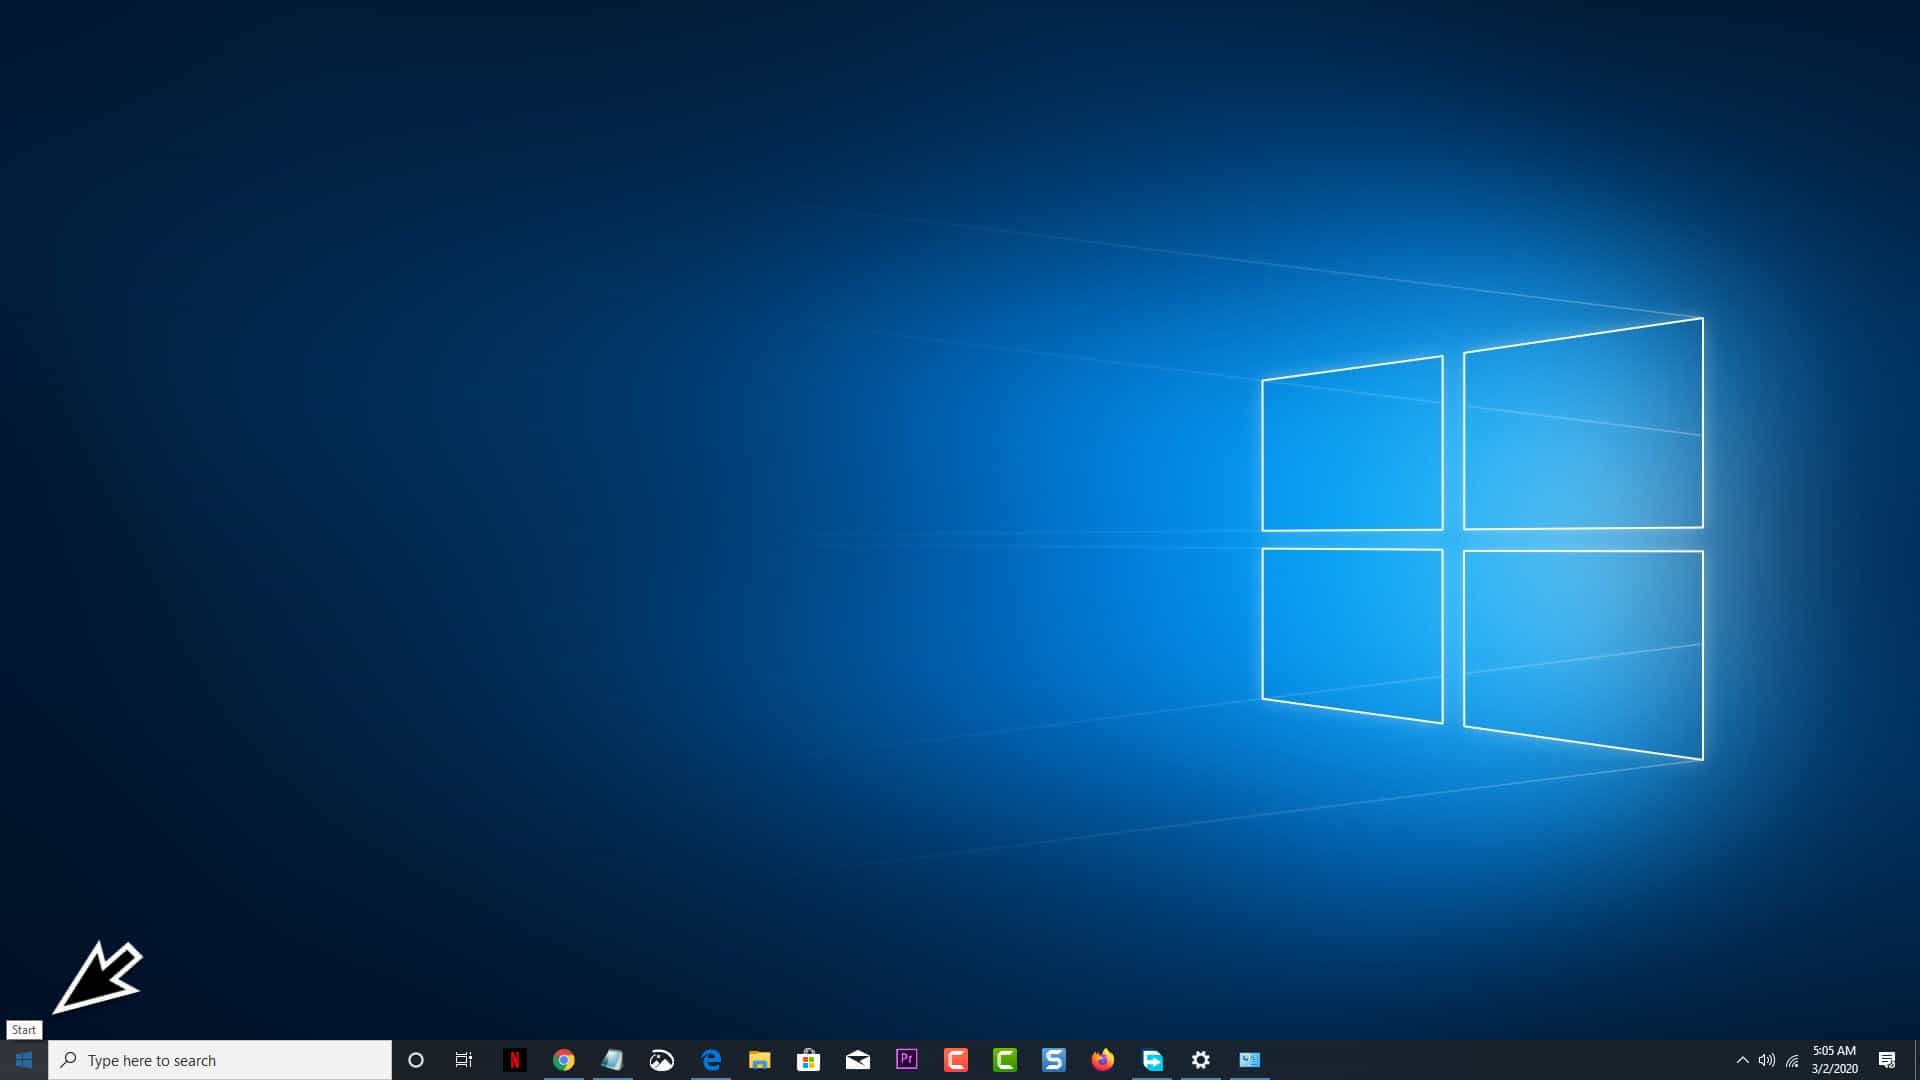 Make Windows 10 run faster by disabling animations